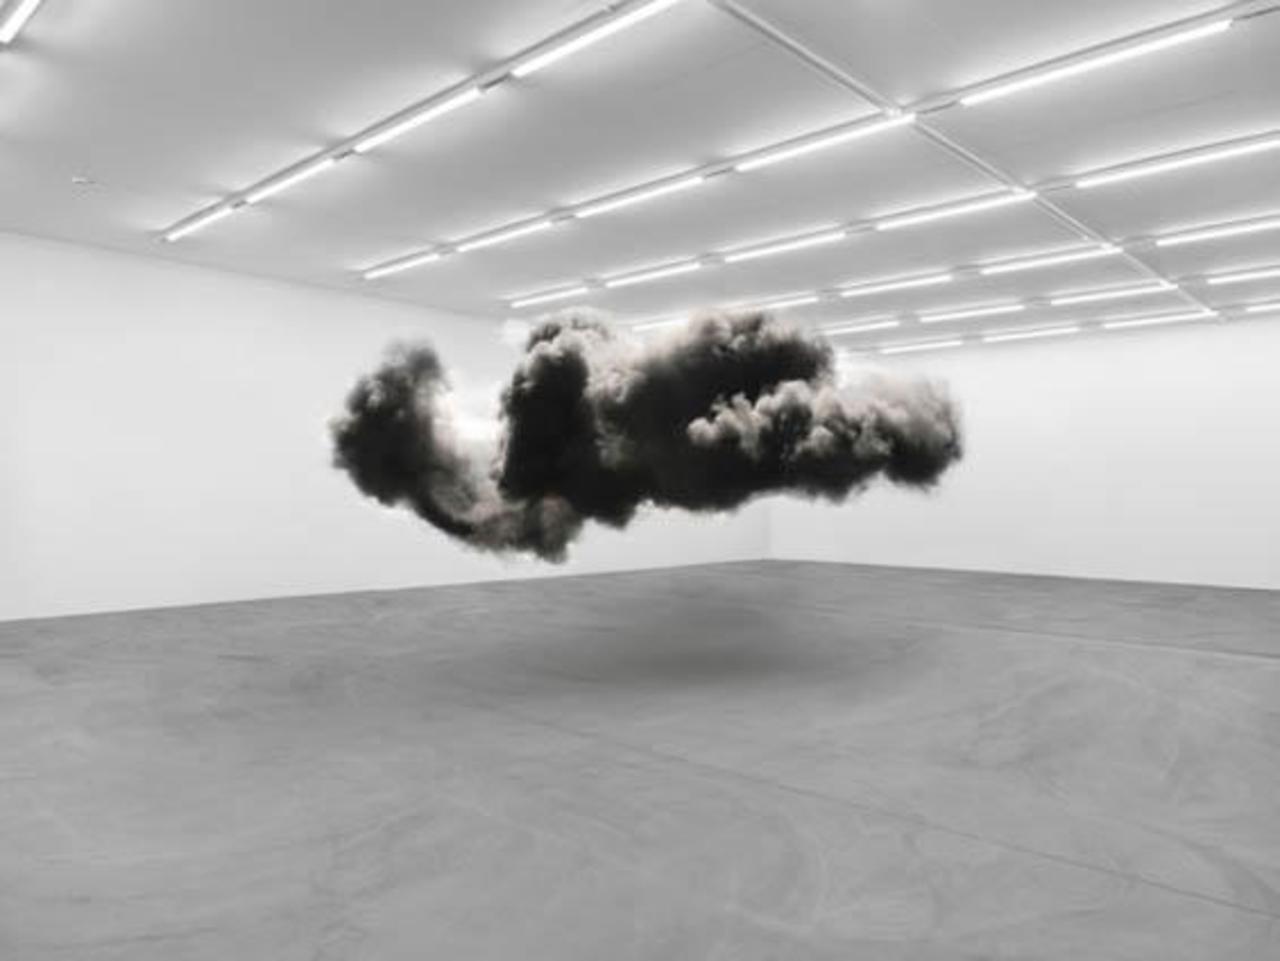 Black and White Installations by Fabian Bürgy - #minimalist #art #installation - http://ort.sh/6uBY4 - http://t.co/3UFPu6vadf